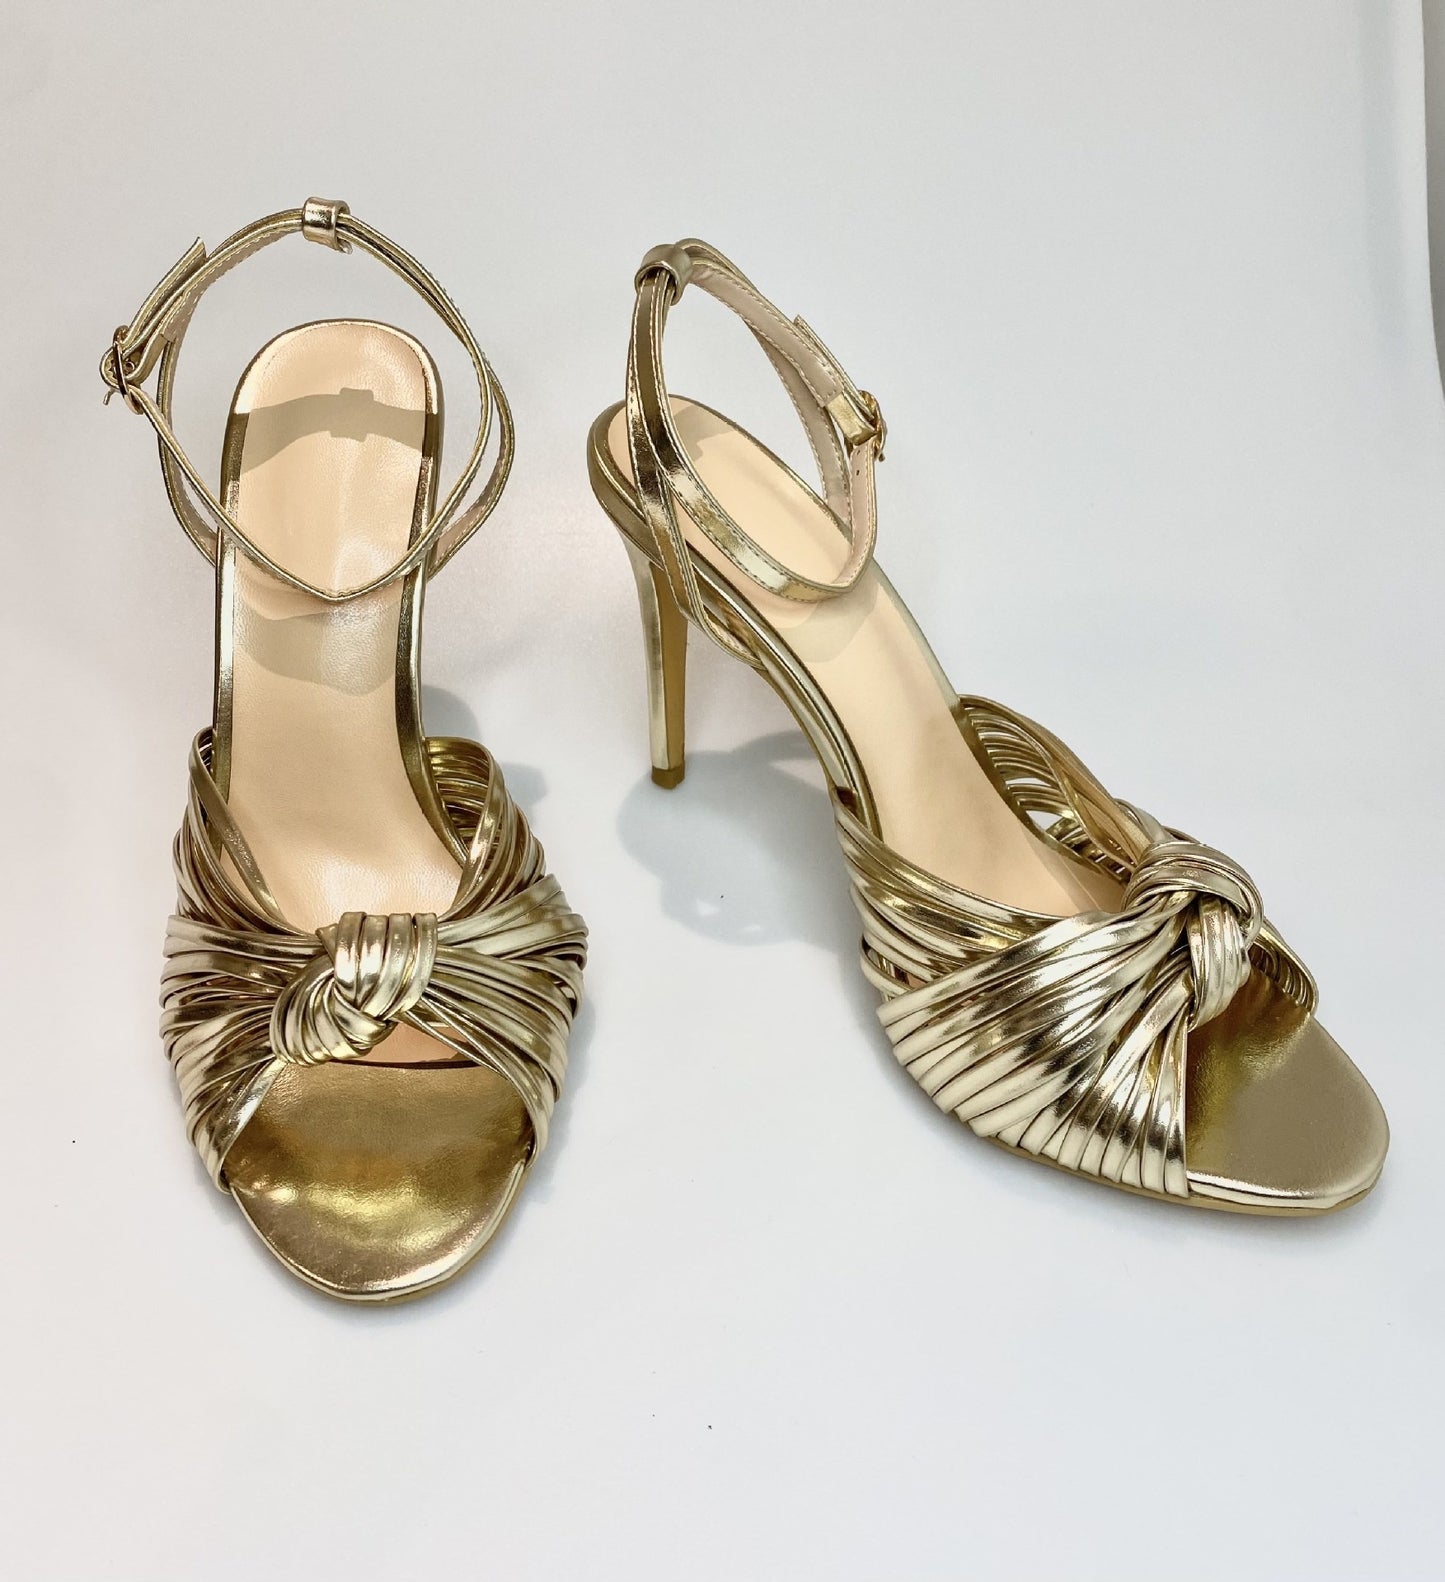 Womens Large Light Gold PU Slim High Heel Sandals Fashion Banquet Party Shoes